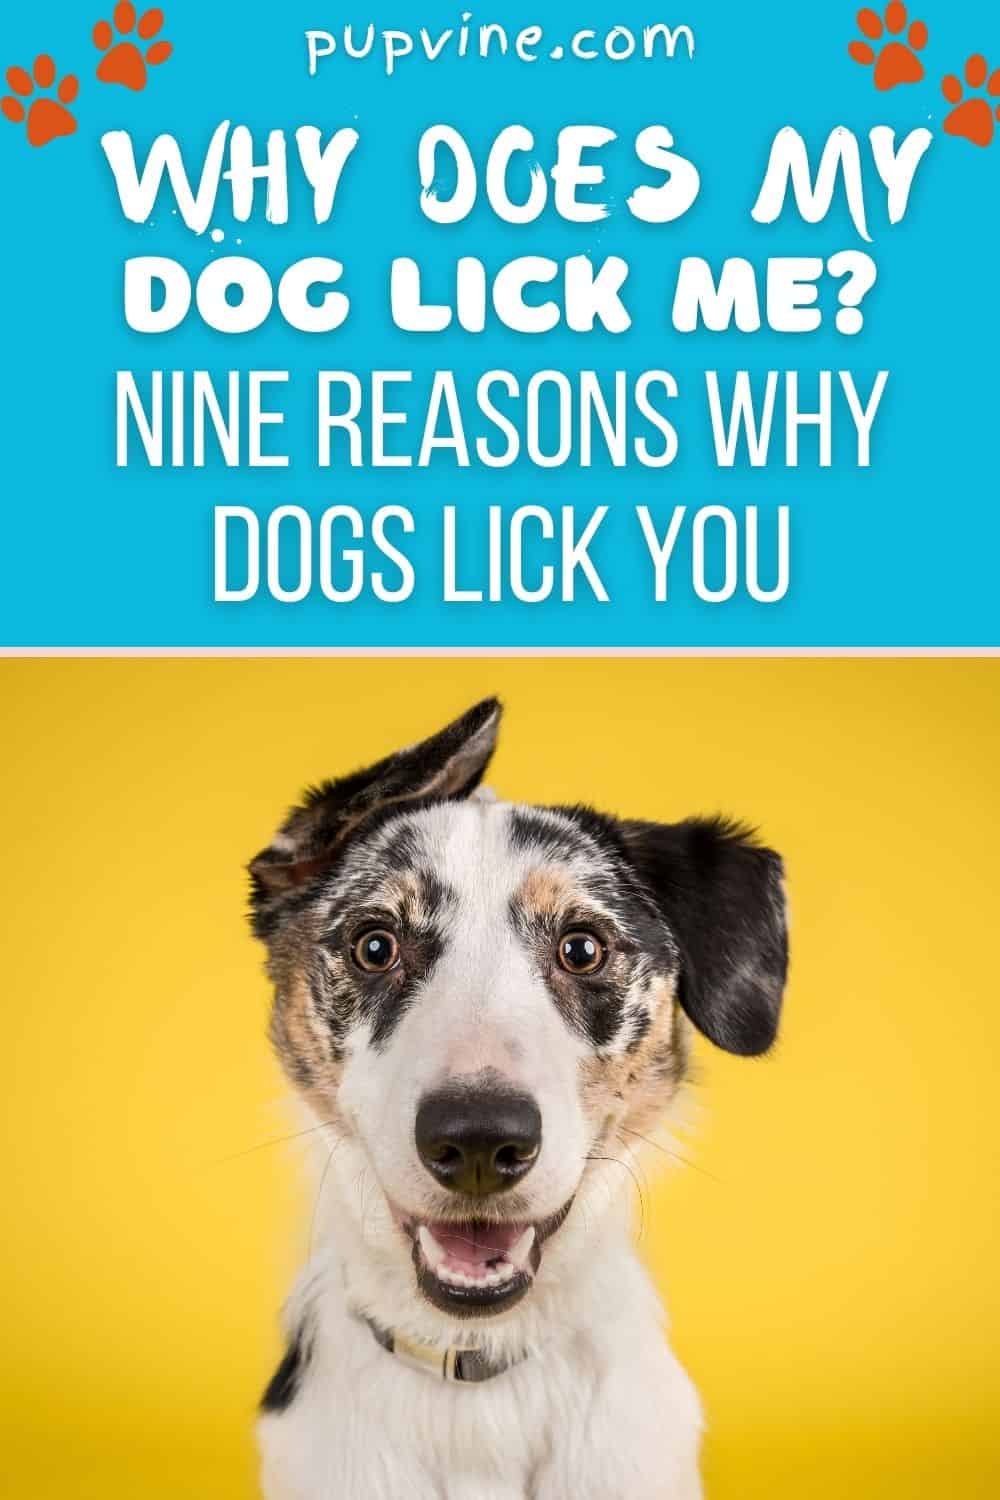 Why Does My Dog Lick Me? Nine Reasons Why Dogs Lick You